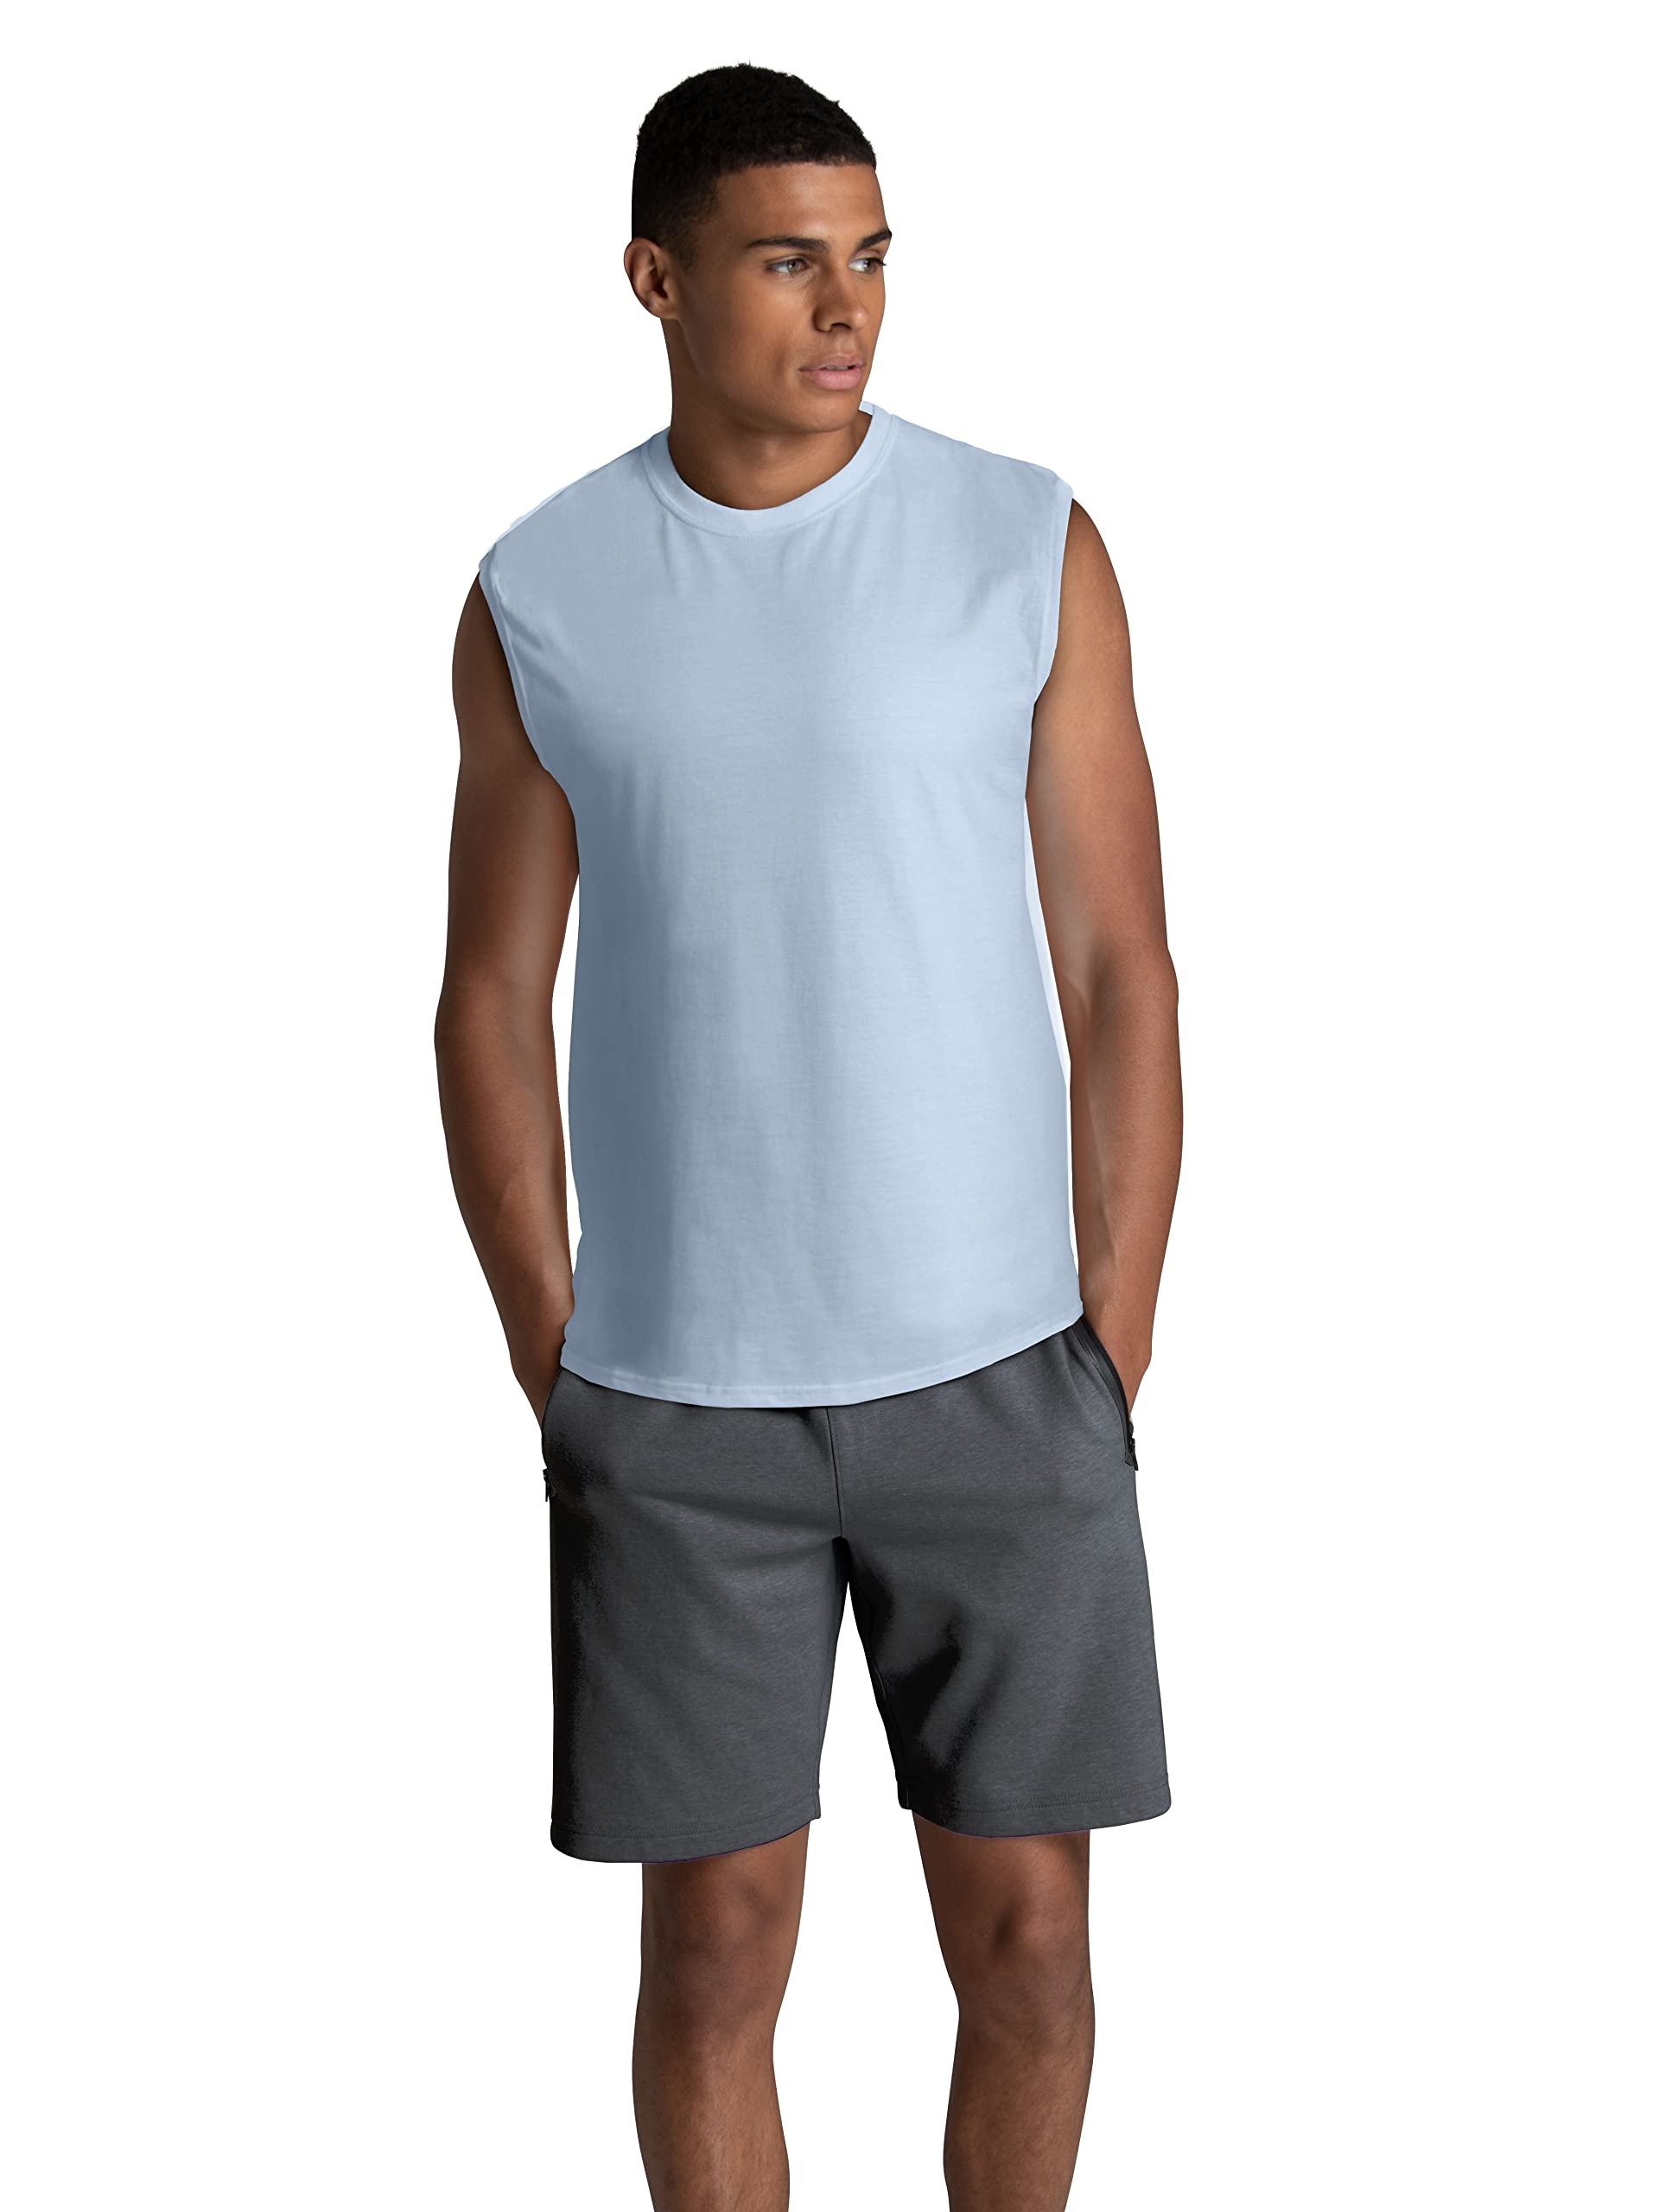 Fruit of the Loom Men's Eversoft Cotton Sleeveless T Shirts, Breathable & Moisture Wicking with Odor Control, Sizes S-4X